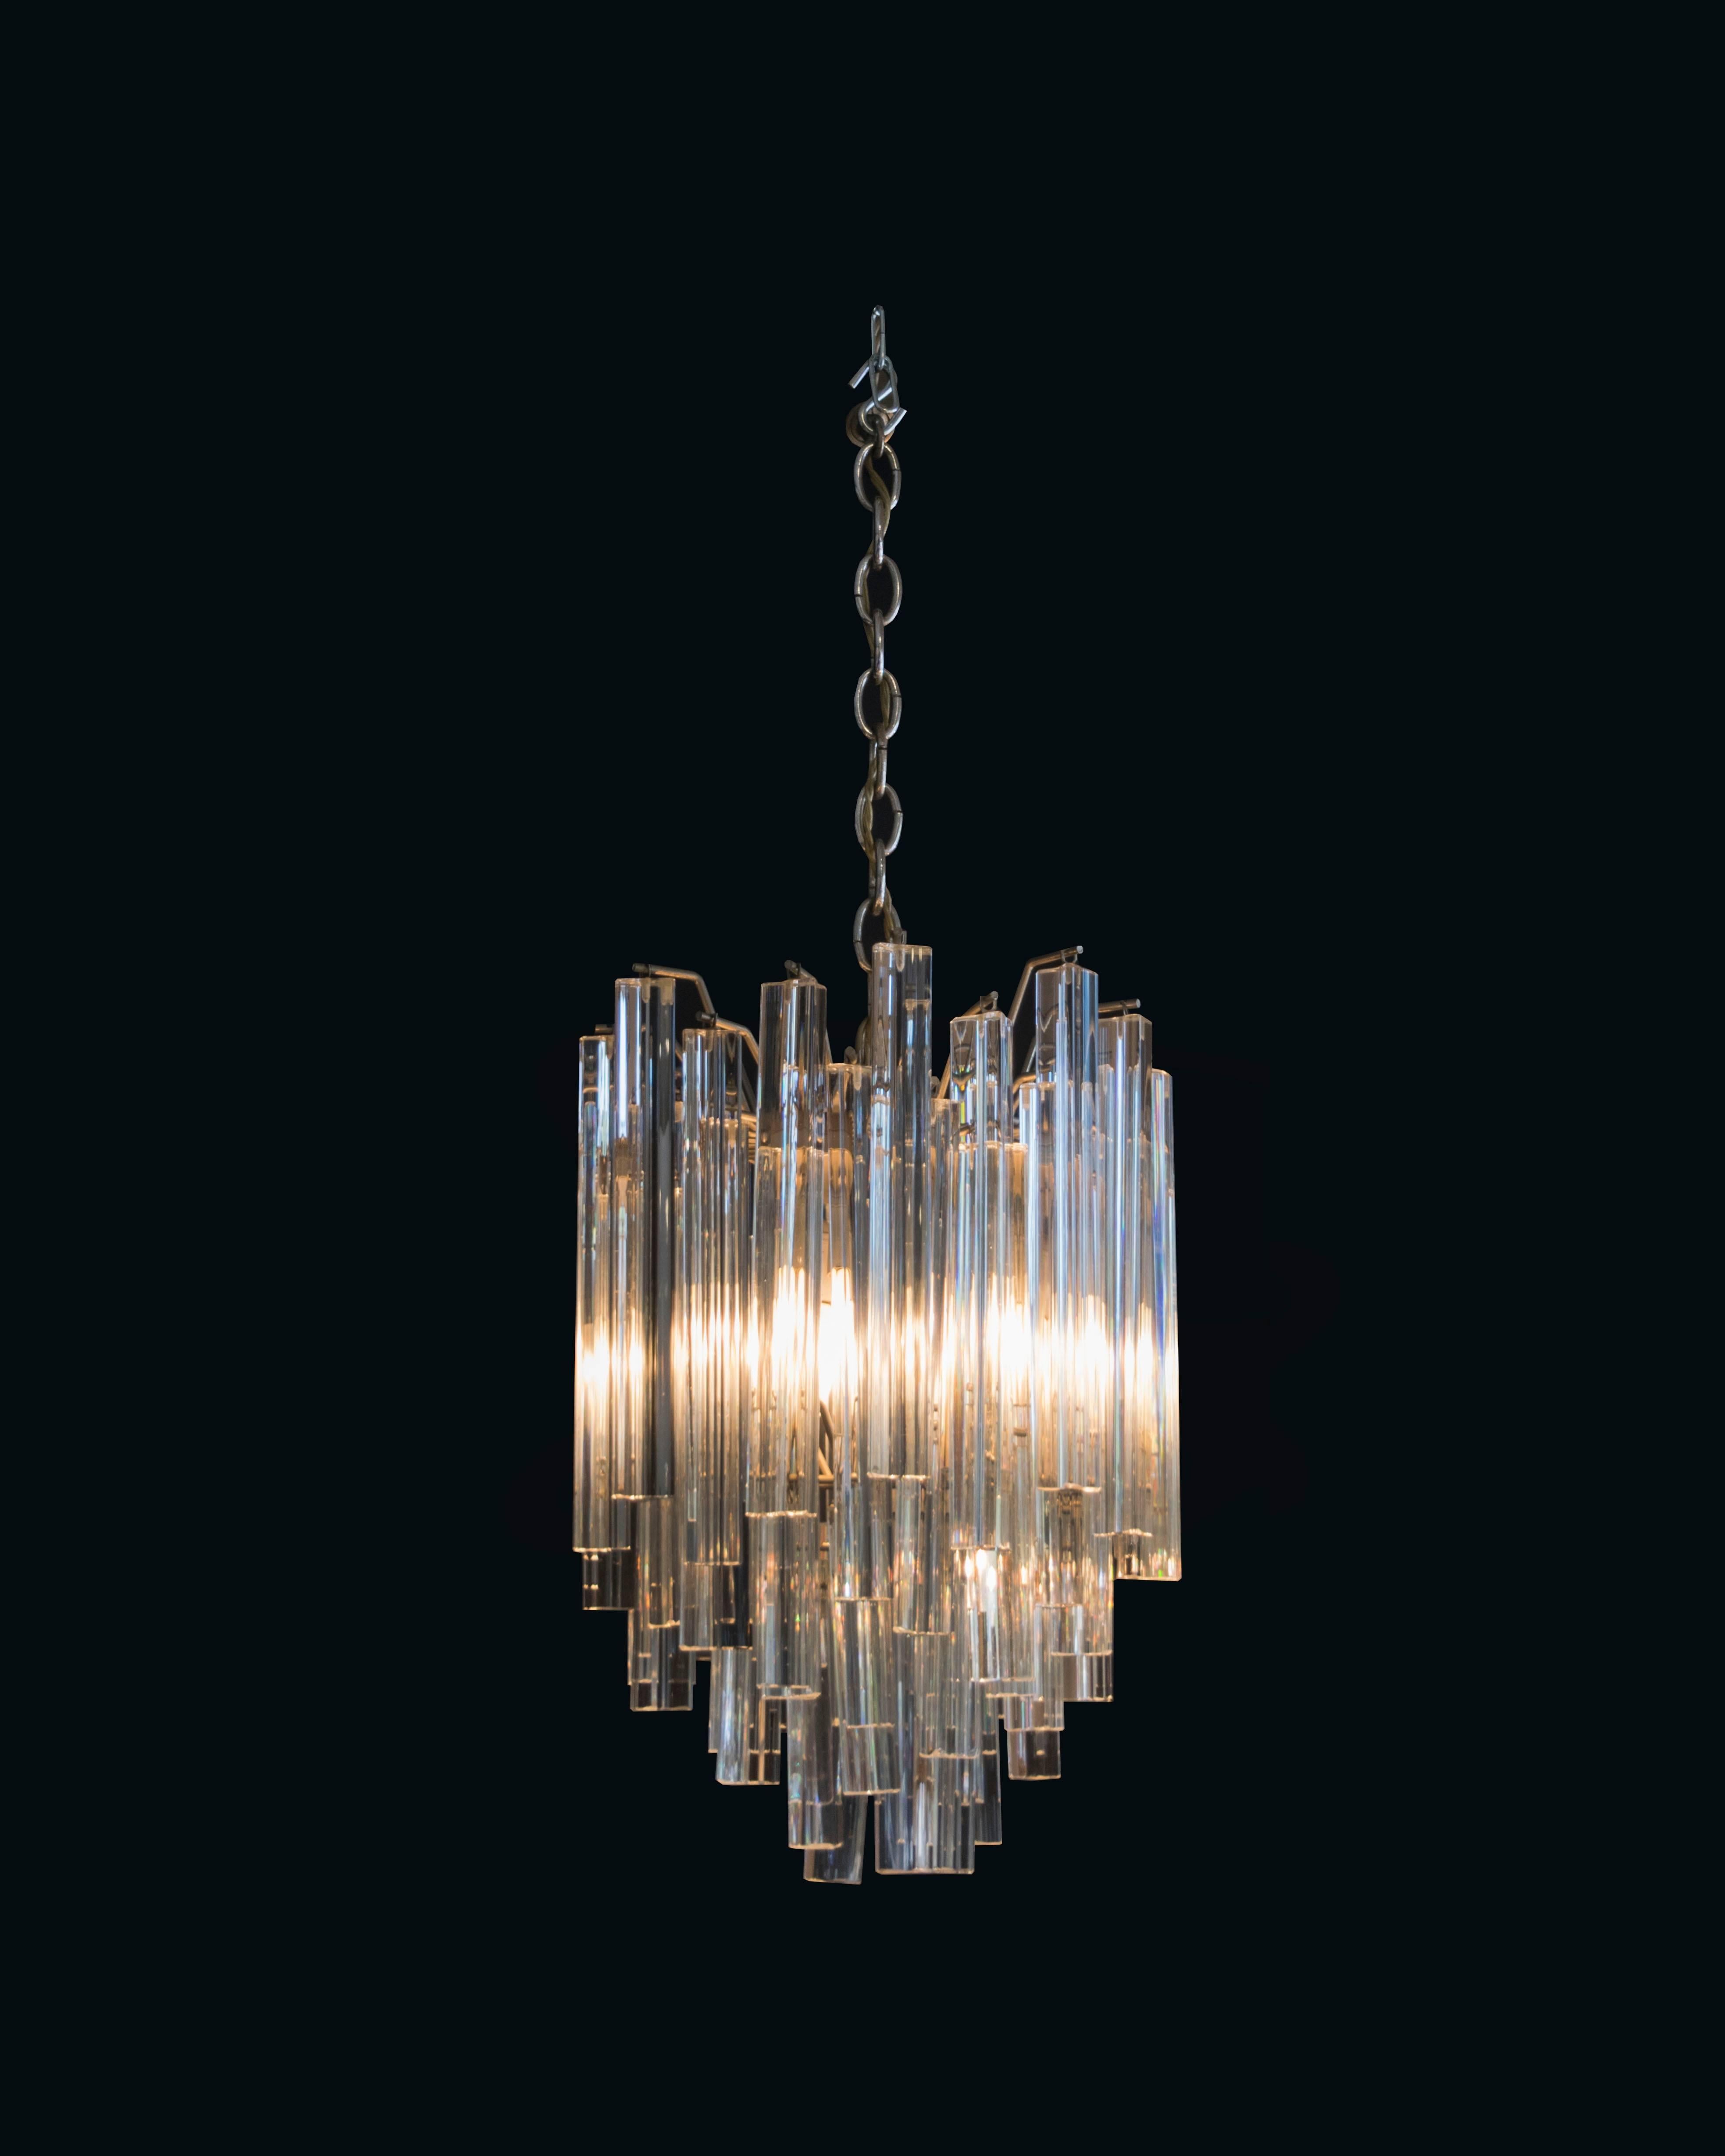 Elegant Venini chandelier with triangular crystals varying from concave to convex casting a beautiful pattern from underneath.